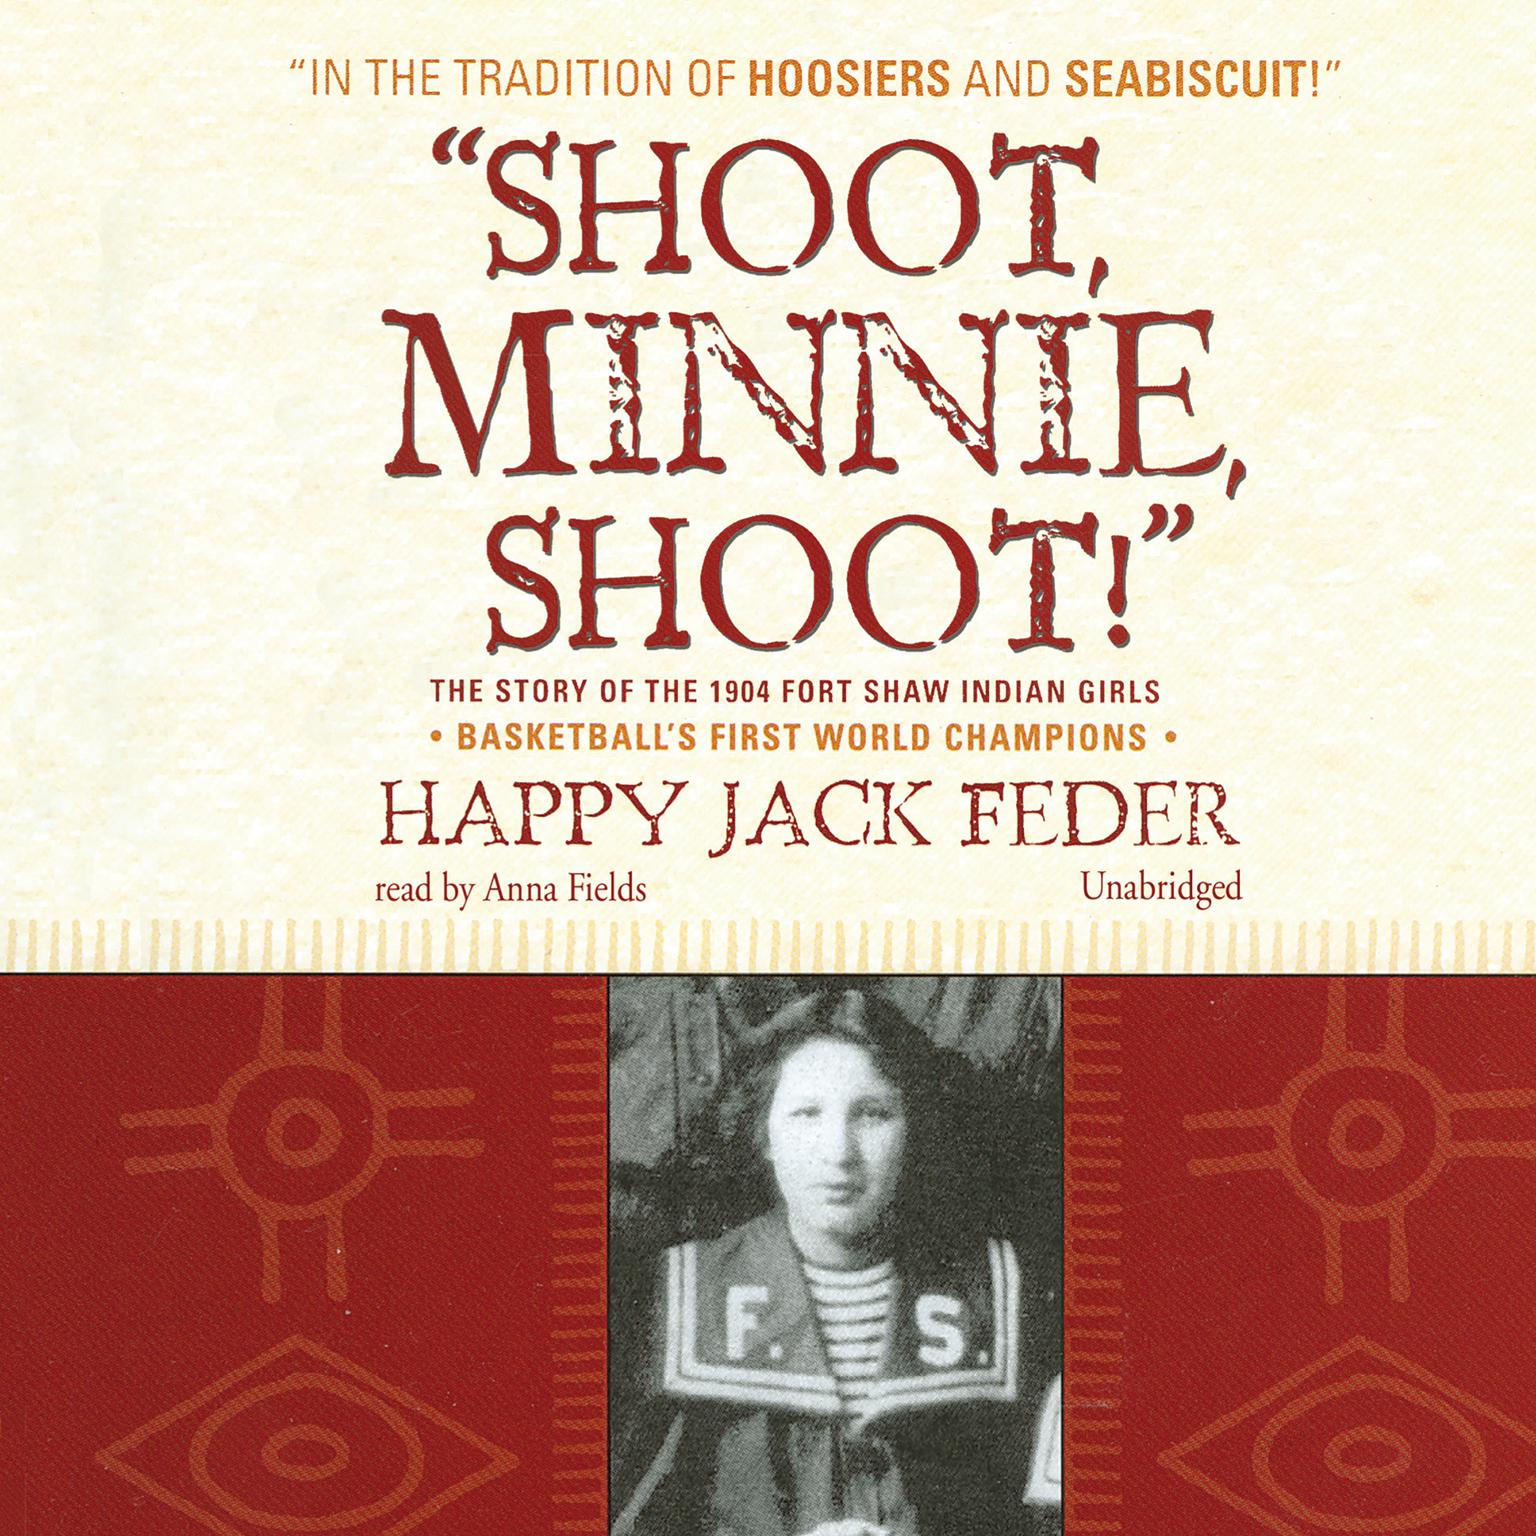 “Shoot, Minnie, Shoot!”: The Story of the 1904 Fort Shaw Indian Girls, Basketball’s First World Champions Audiobook, by Happy Jack Feder